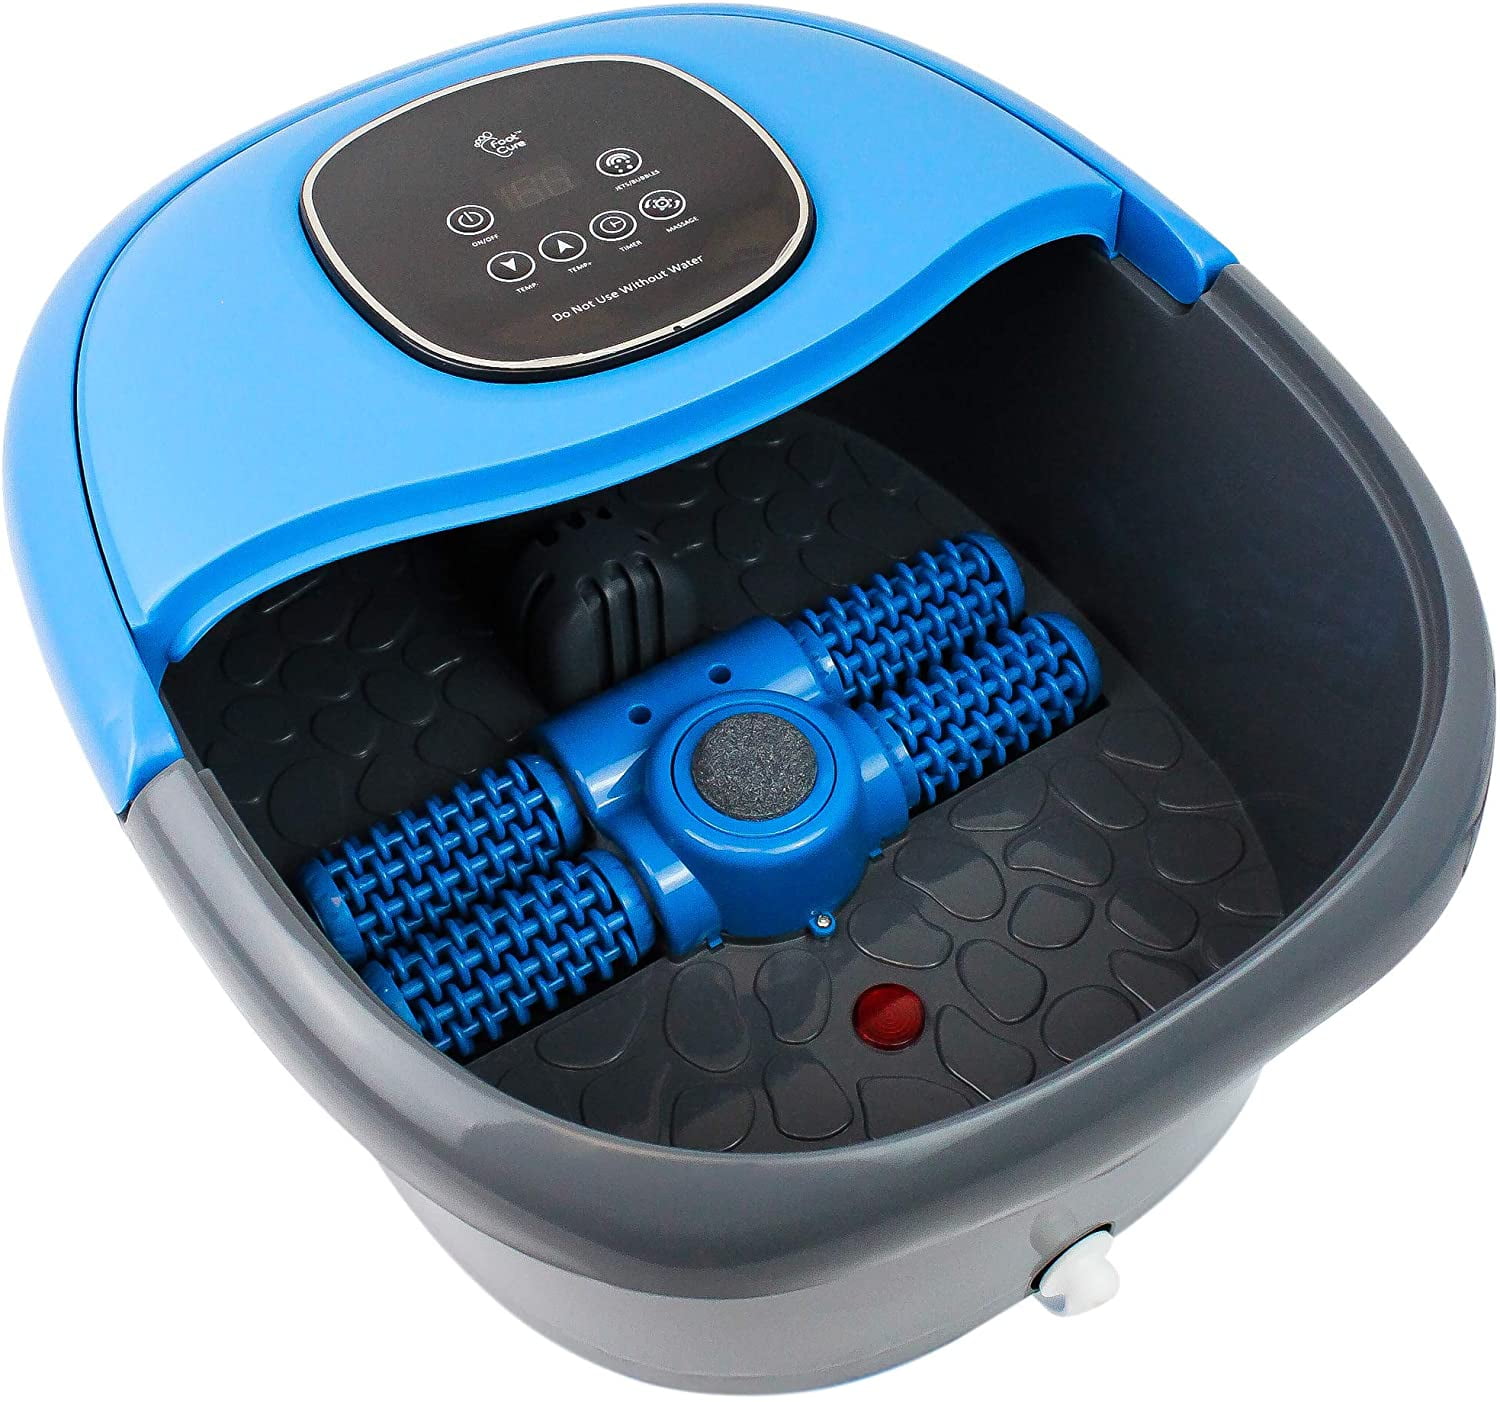 FOOT CURE Foot Spa Massager Basin Heated E